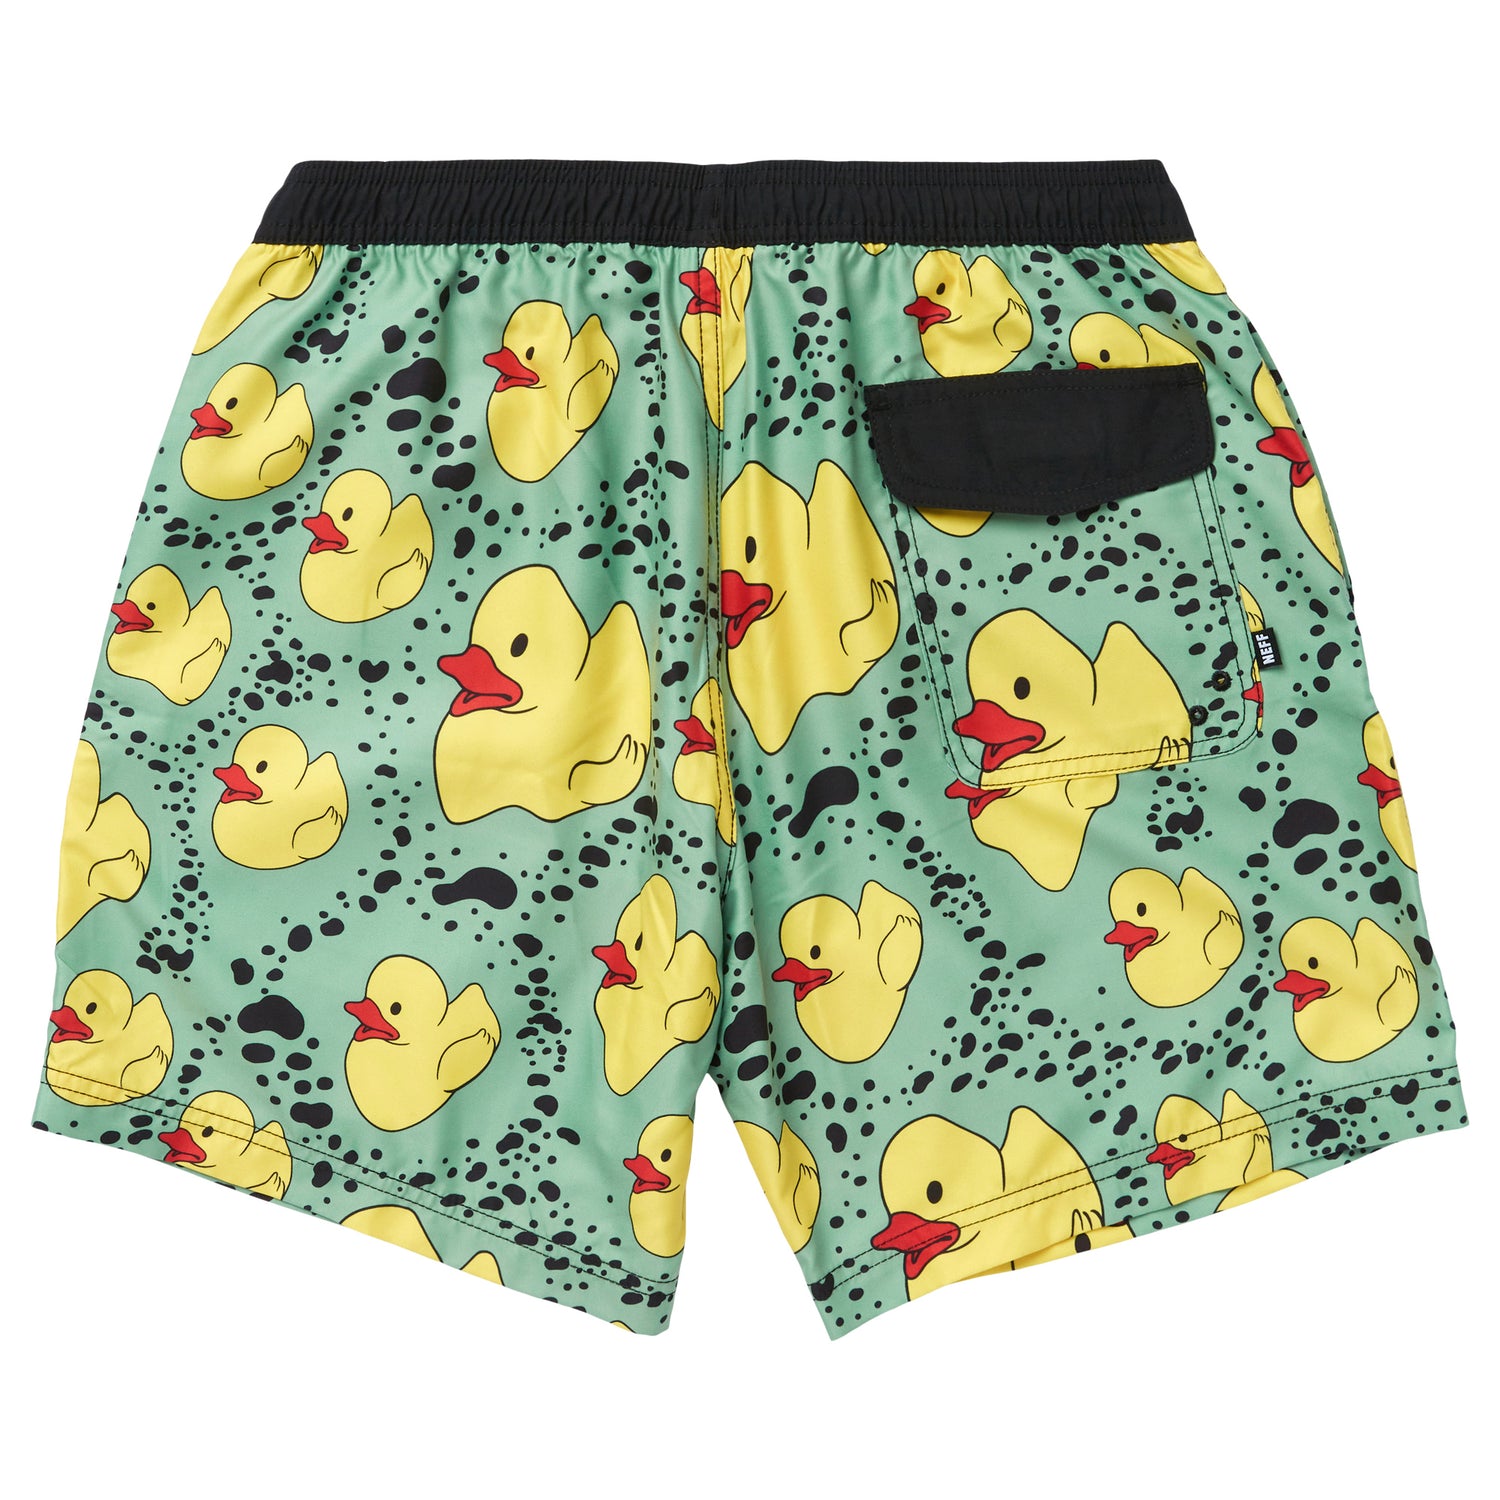 DUCKY LIFE 17" HOT TUB VOLLEY SHORTS - GREEN